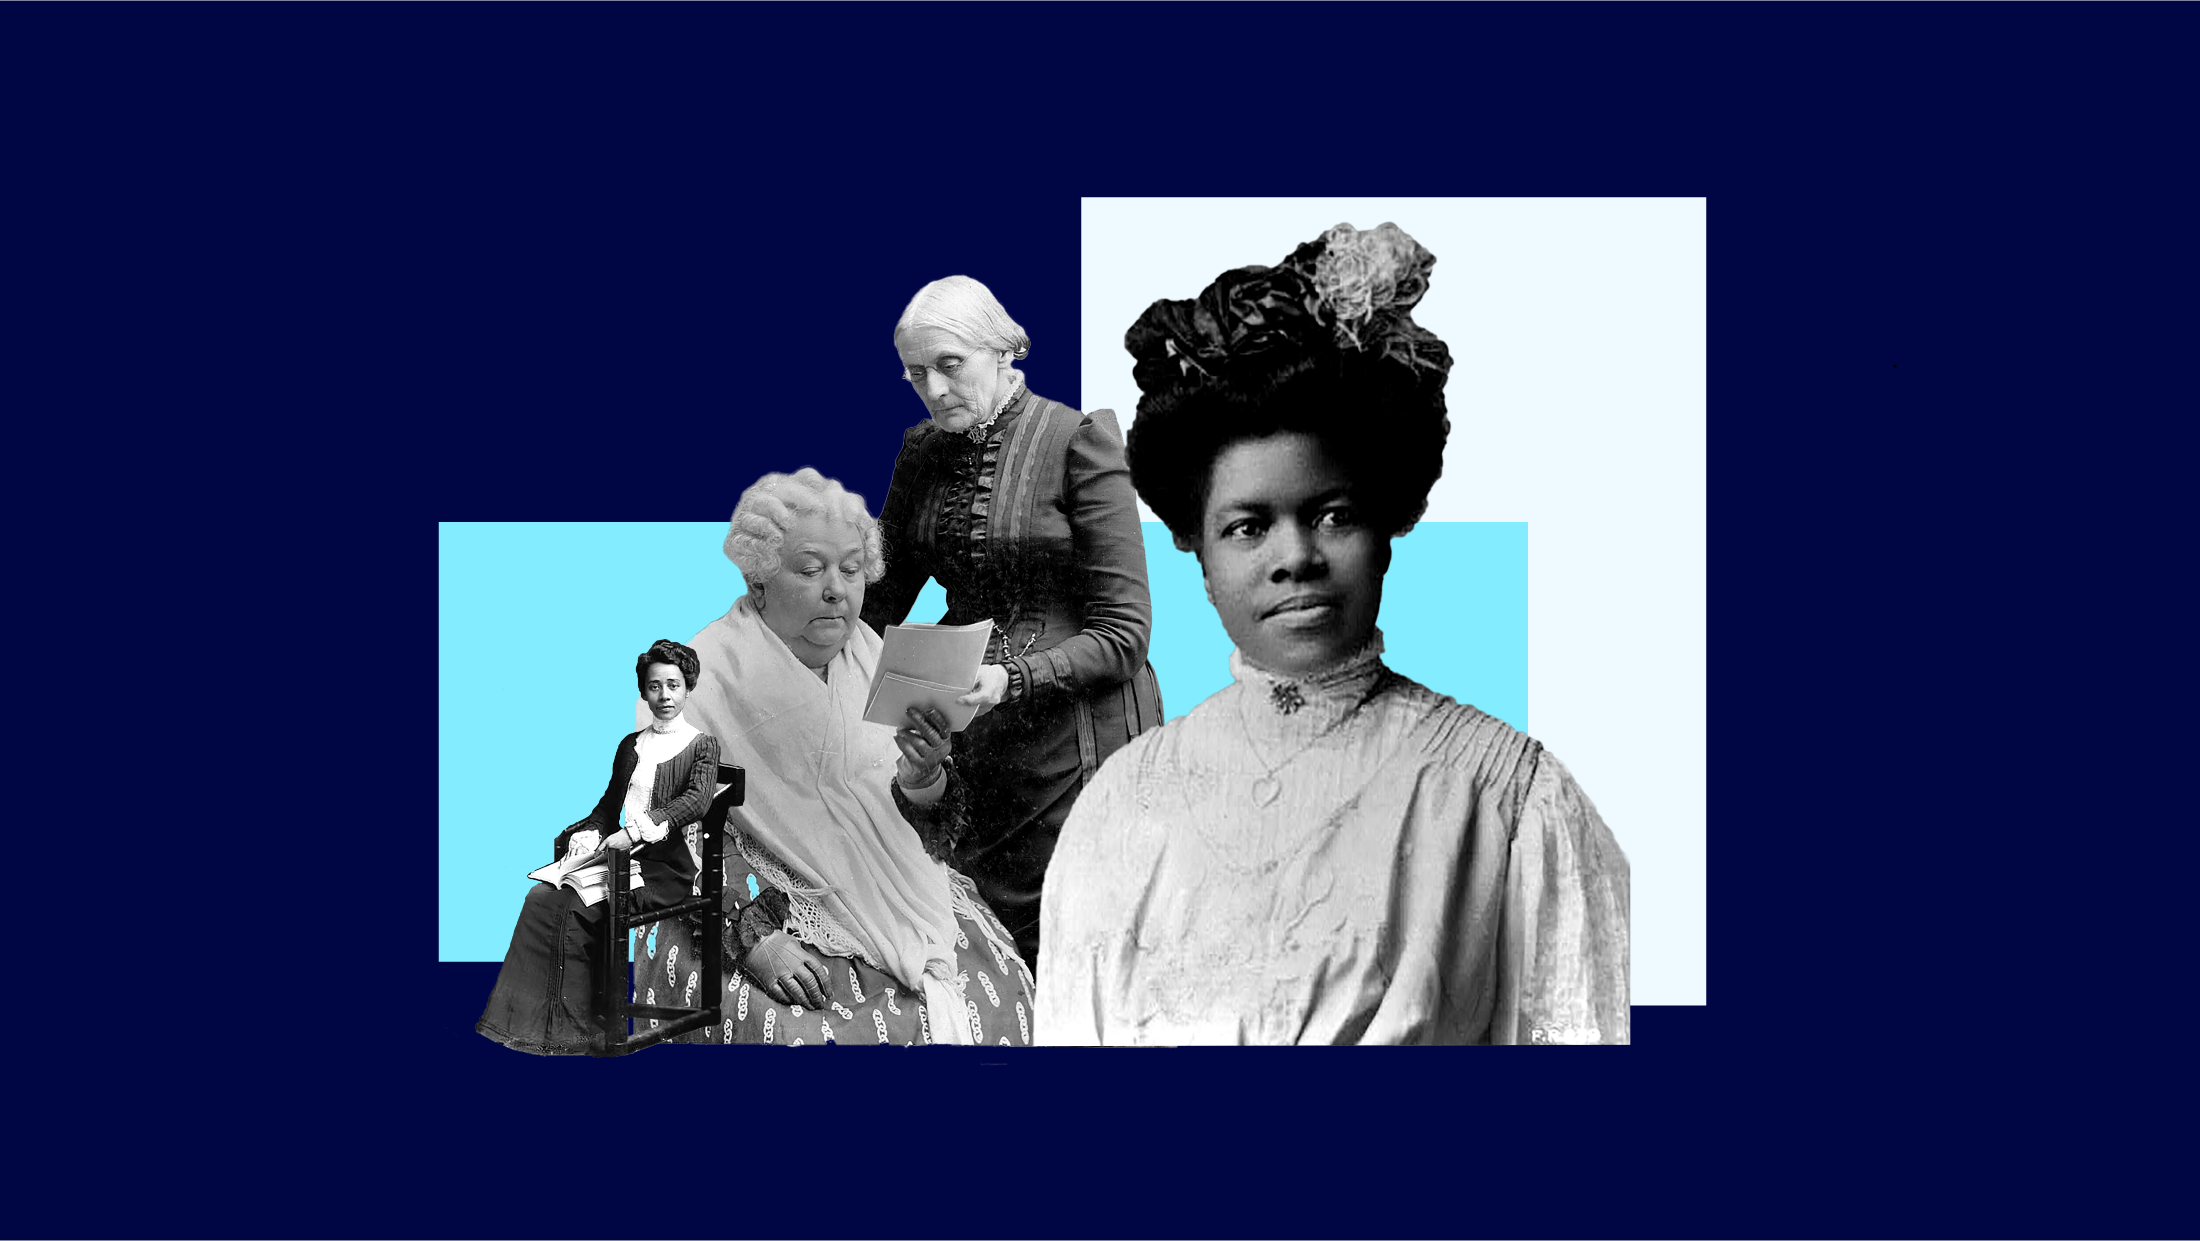 A collage of female suffragists including Nannie Helen Burroughs, Anna J. Cooper, Elizabeth Cady Stanton, and Susan B. Anthony